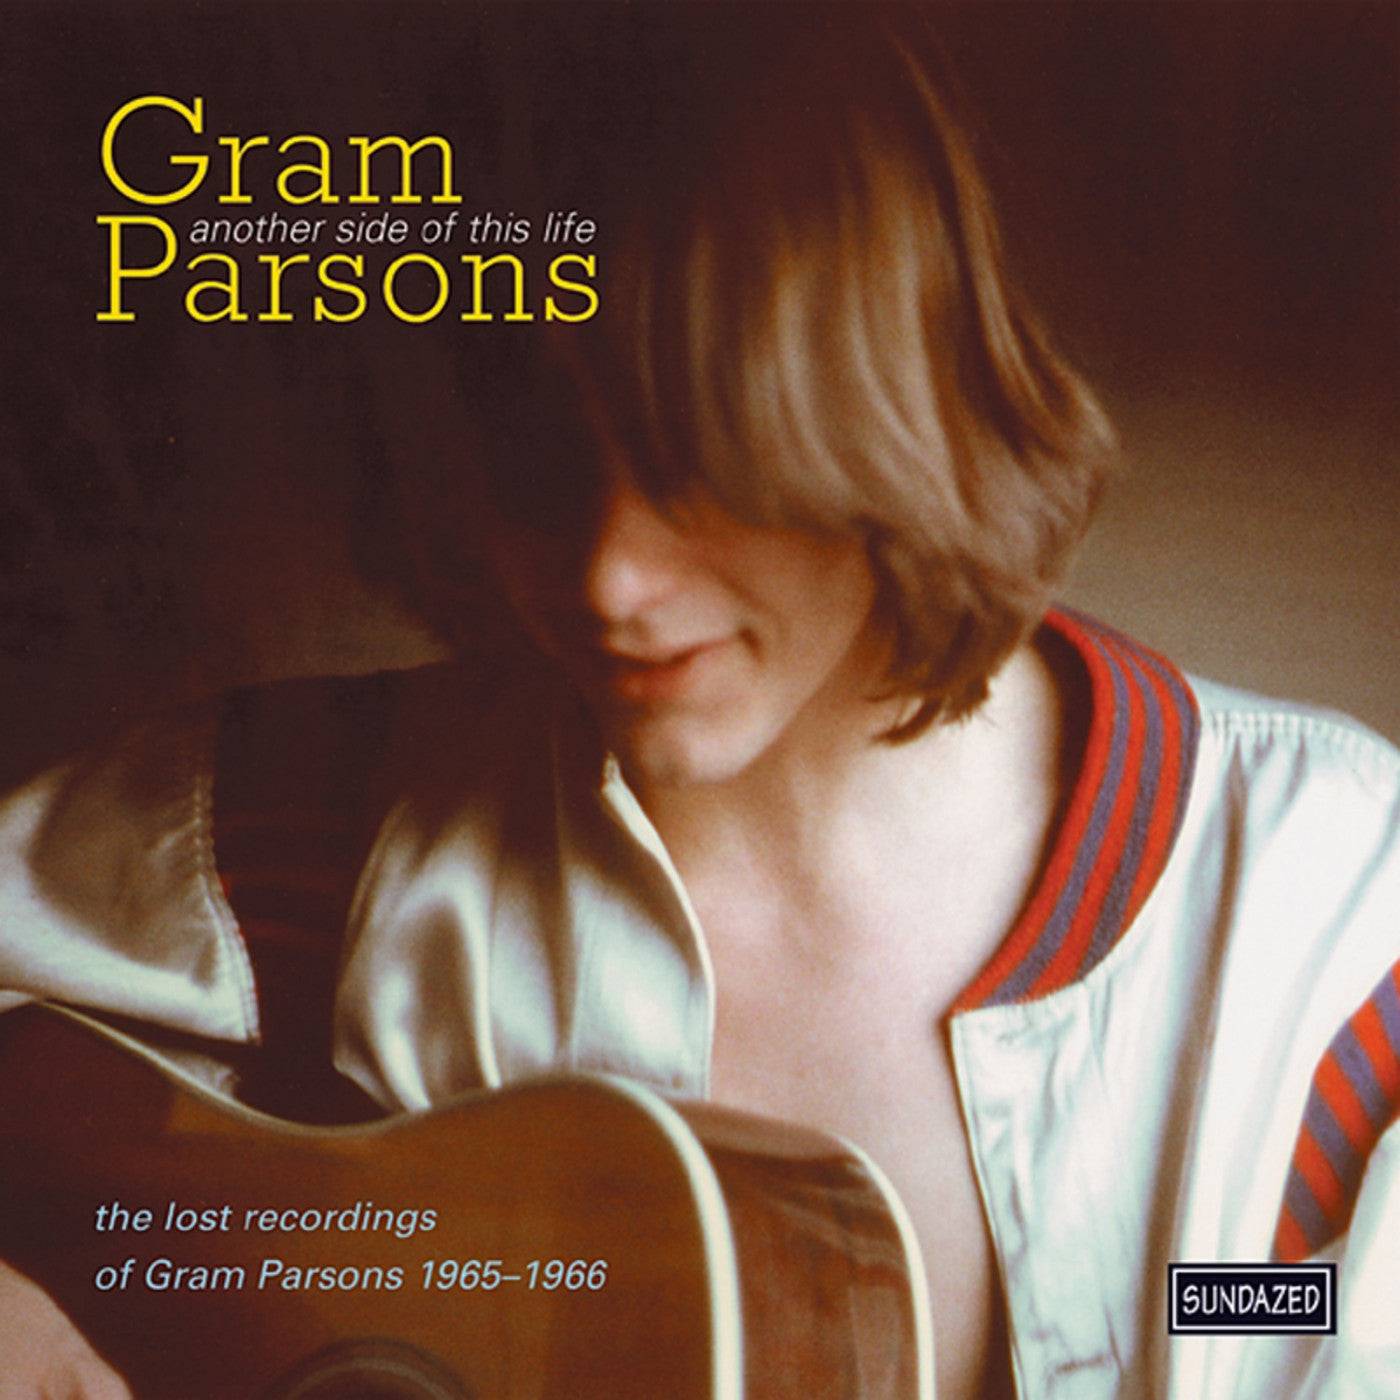 GRAM PARSONS - ANOTHER SIDE OF THIS LIFE Vinyl LP